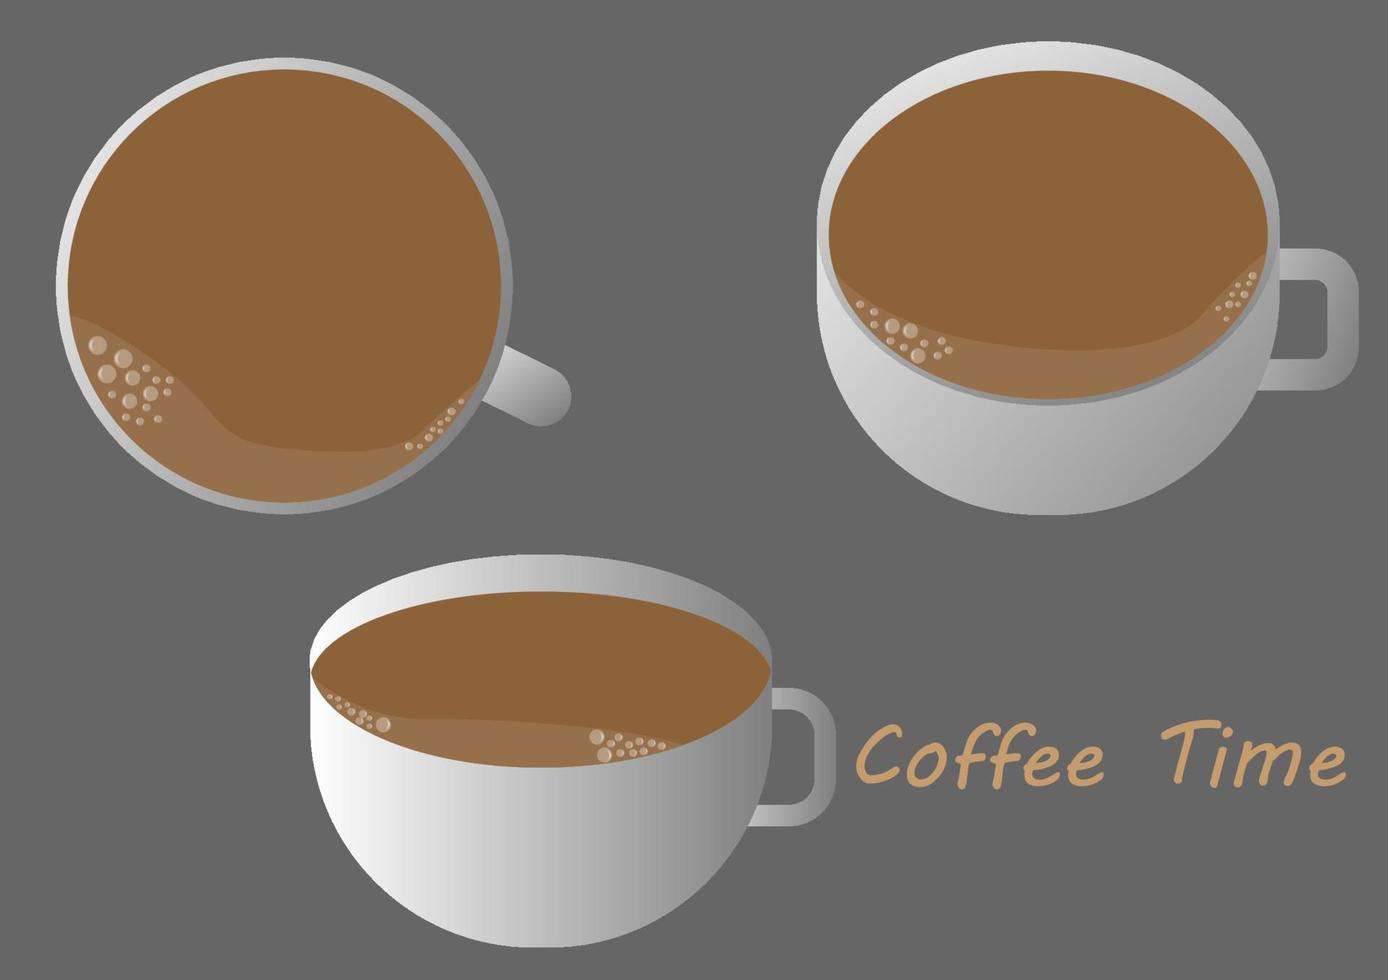 Illustrator vector of coffee cup in difference view